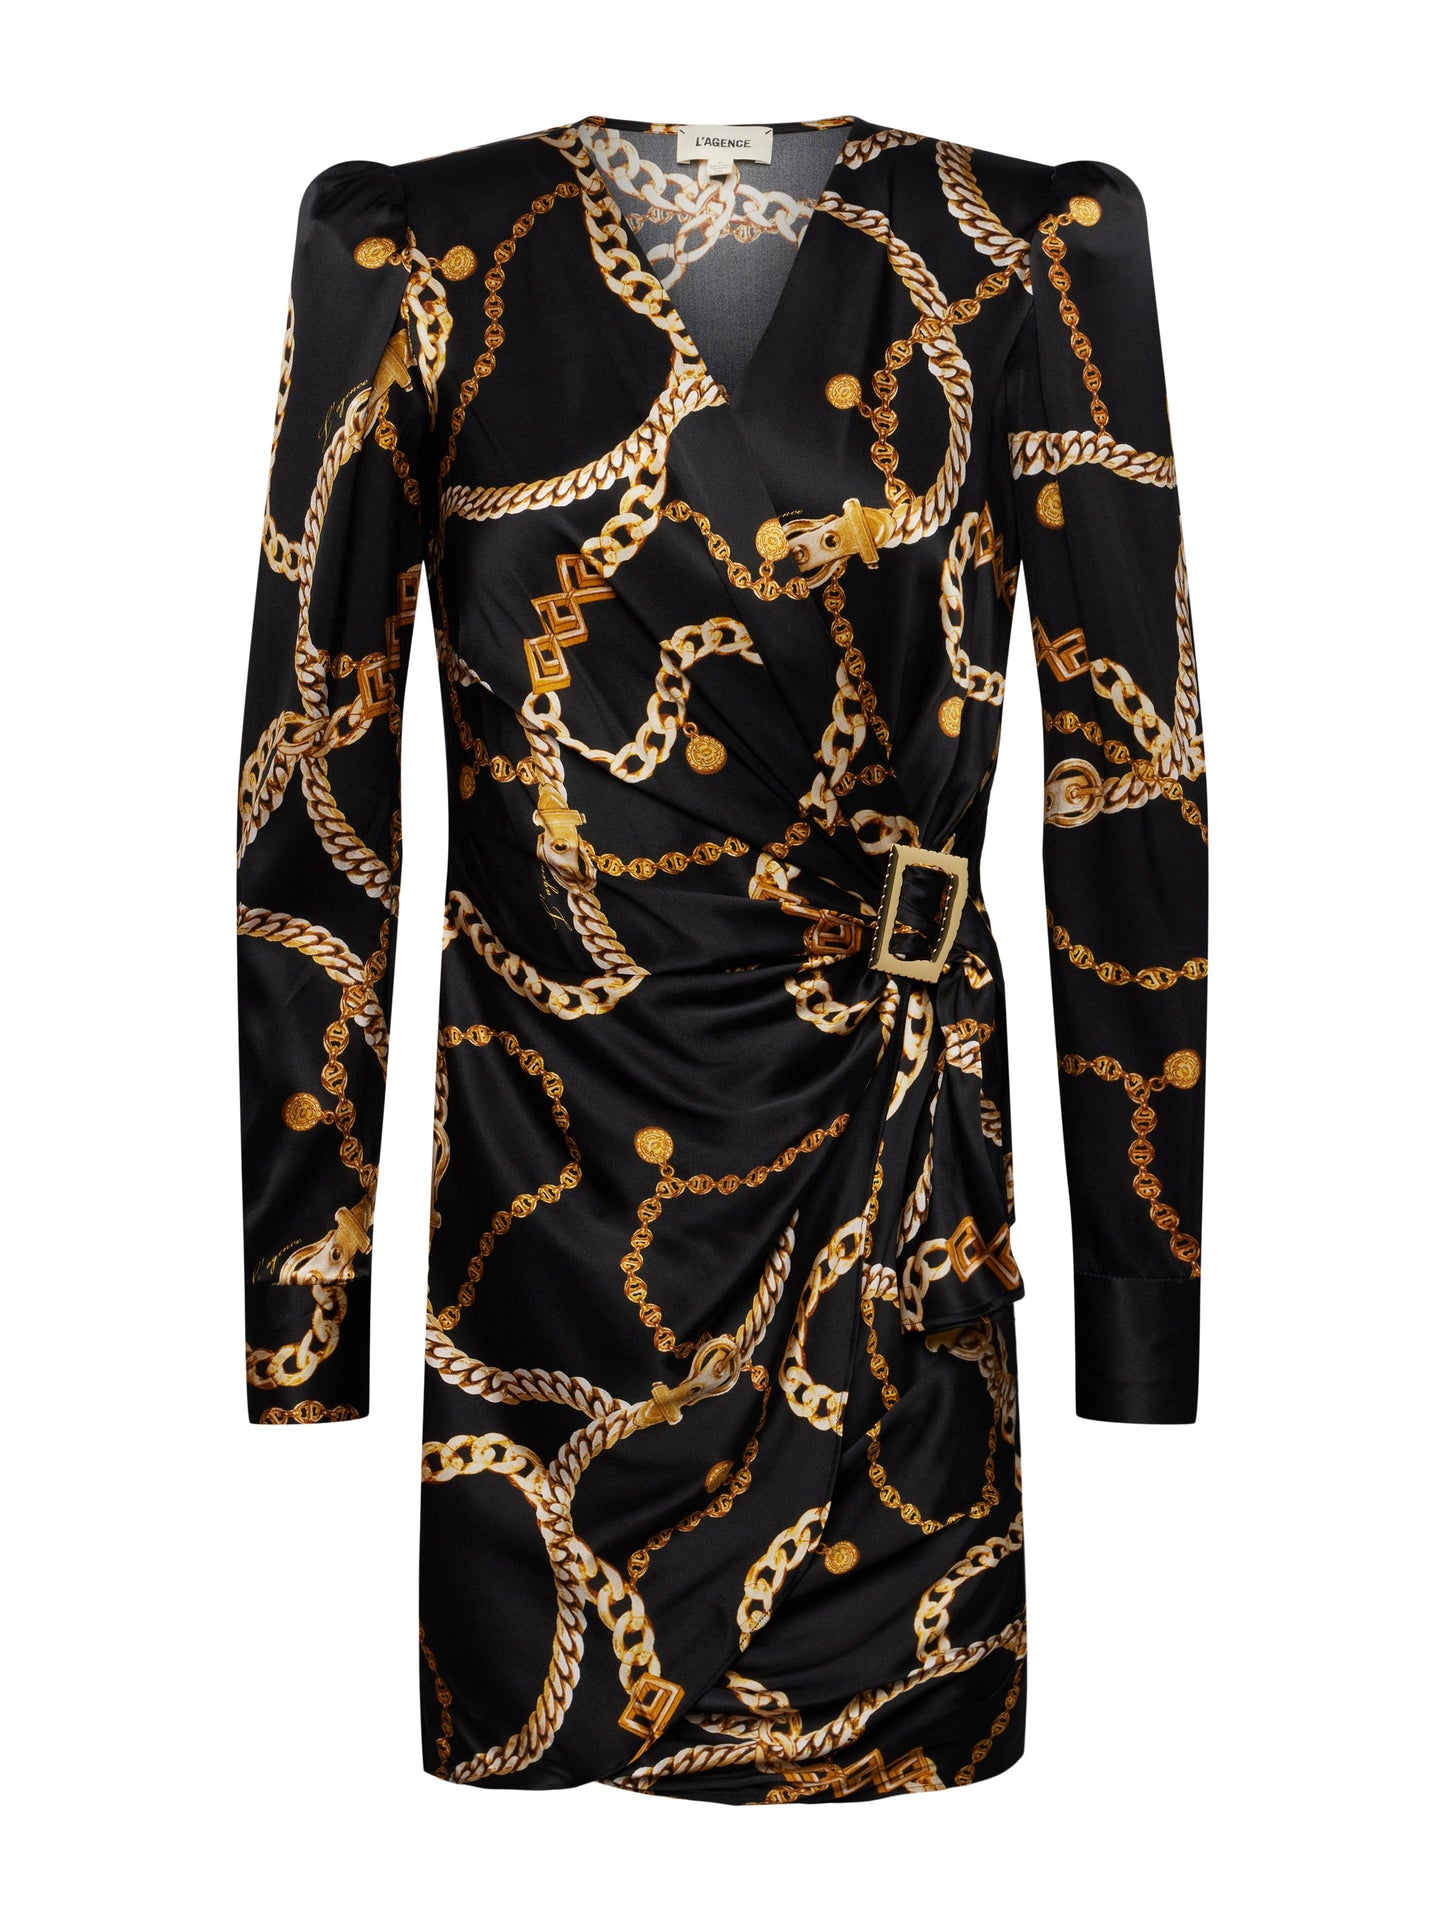 Clarice Wrap Dress Black Gold Large Classic Chain - L'AGENCE